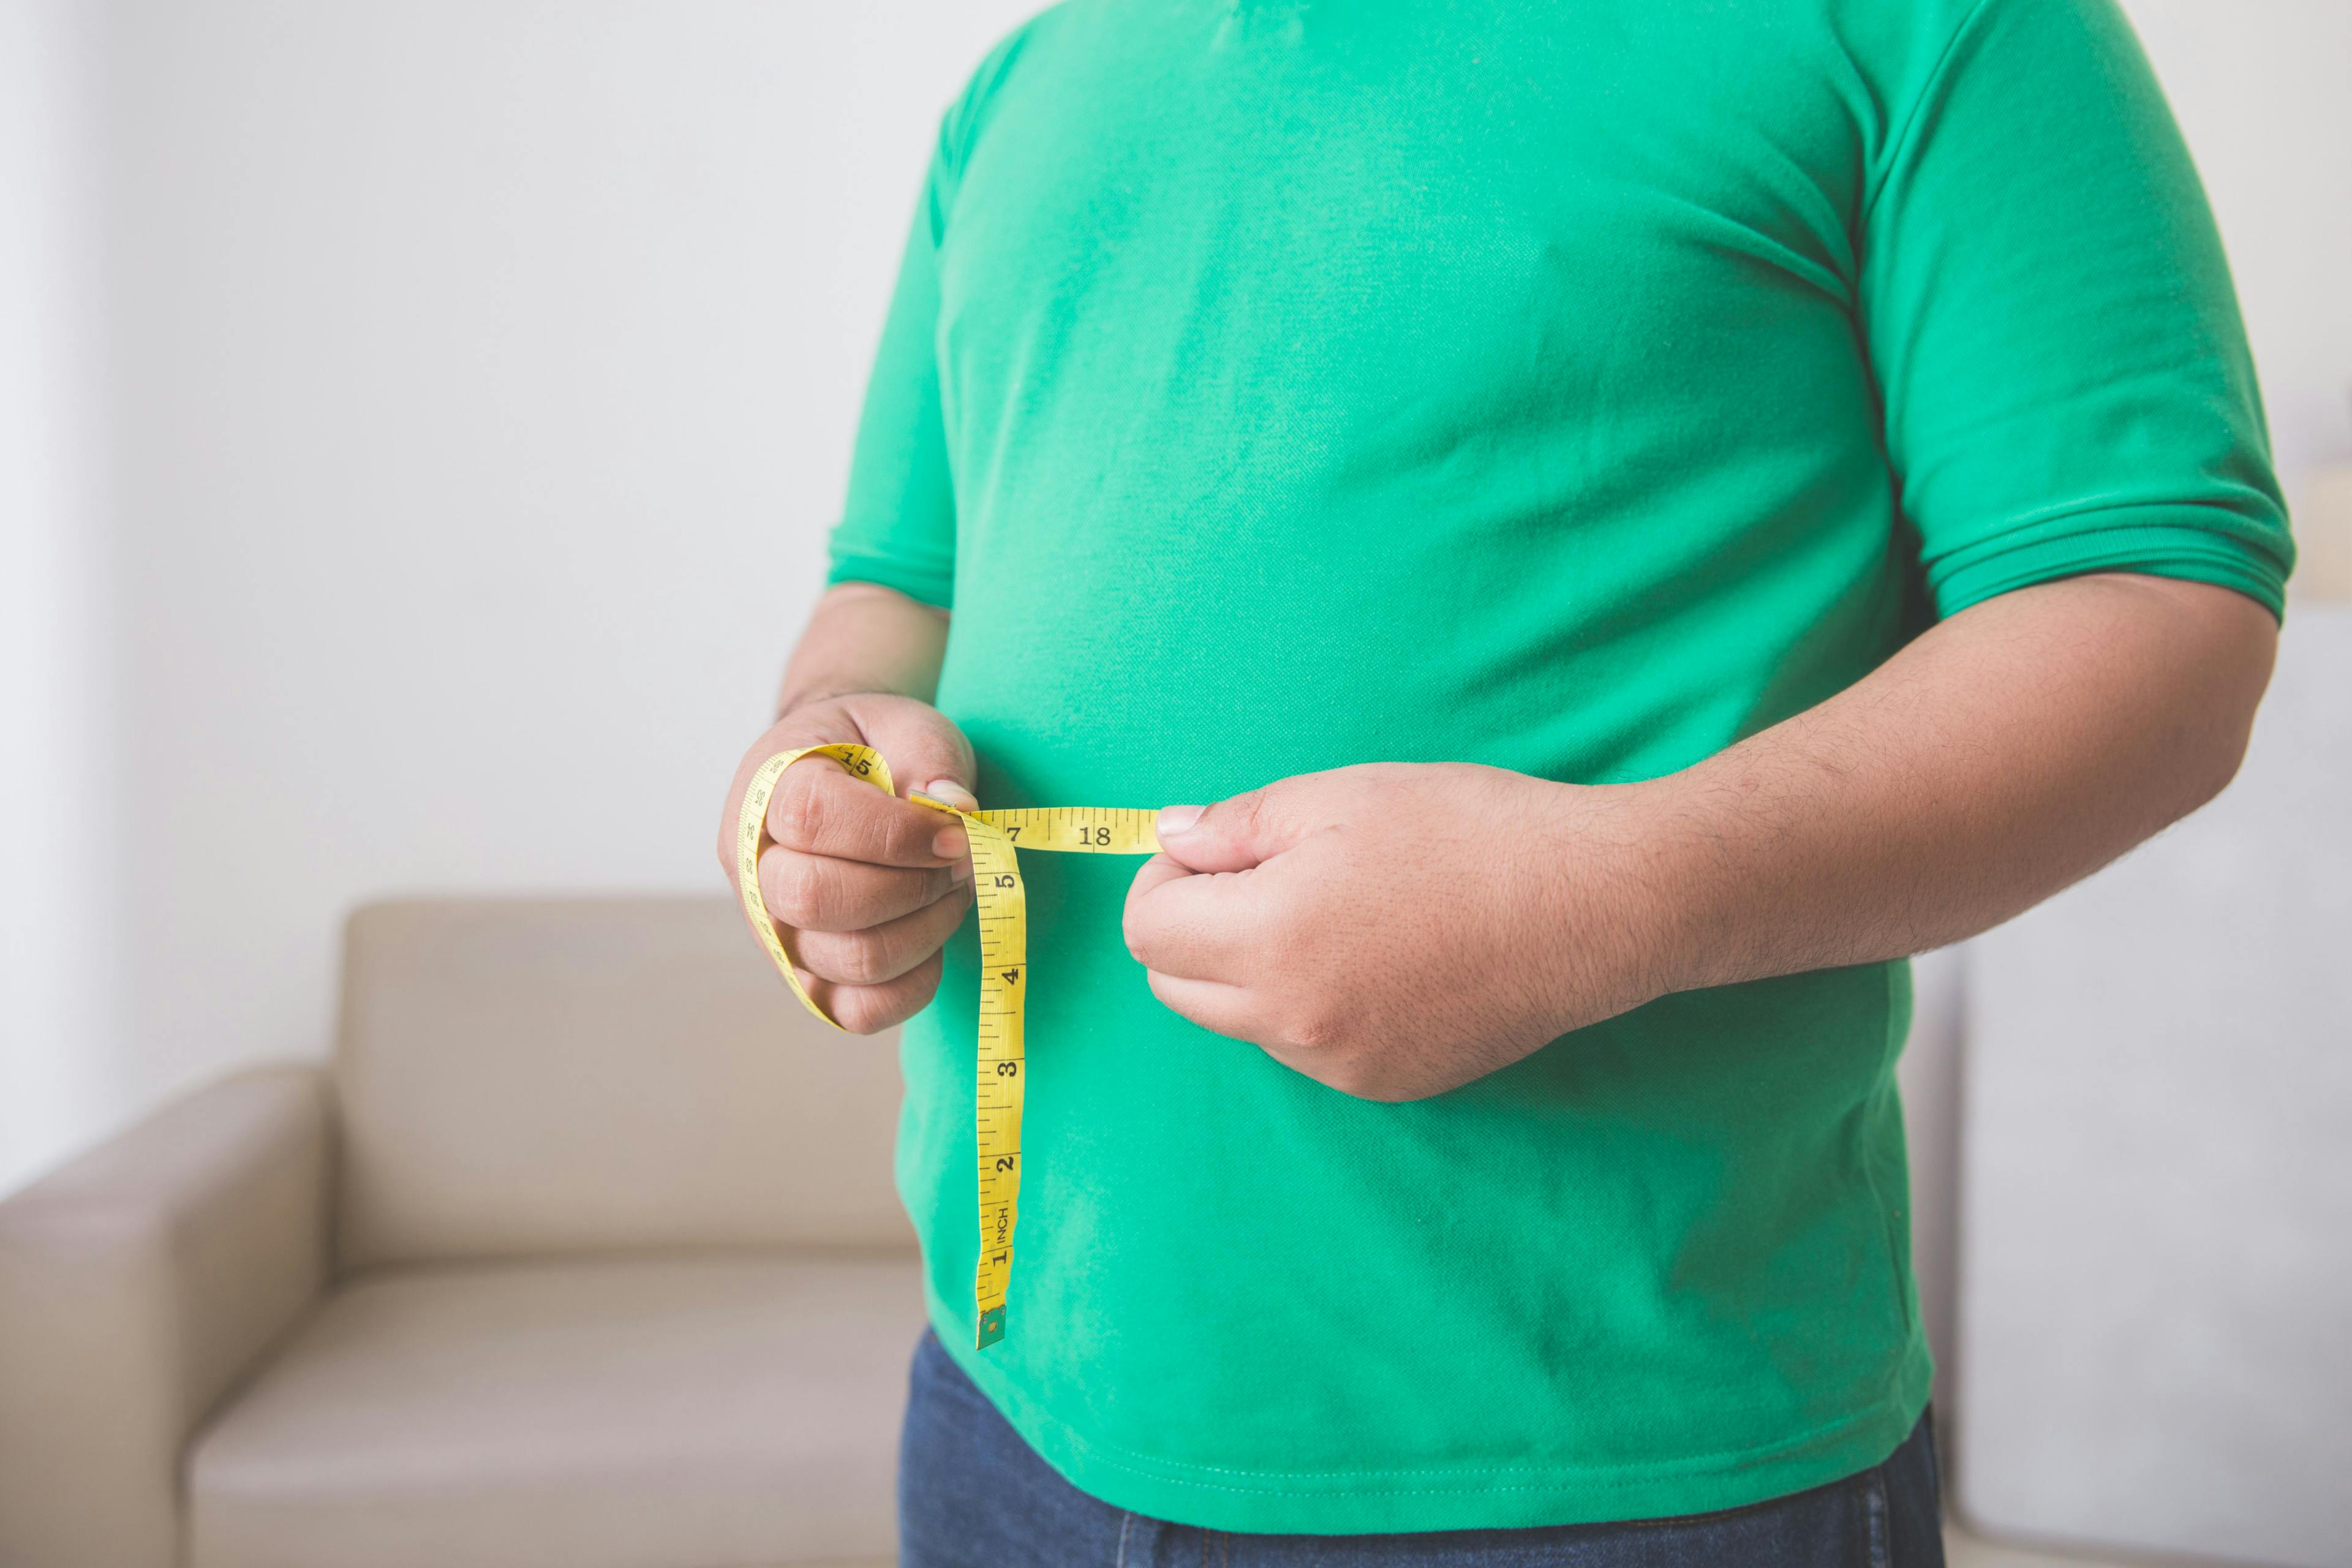 A person with overweight/obesity measuring their midsection.